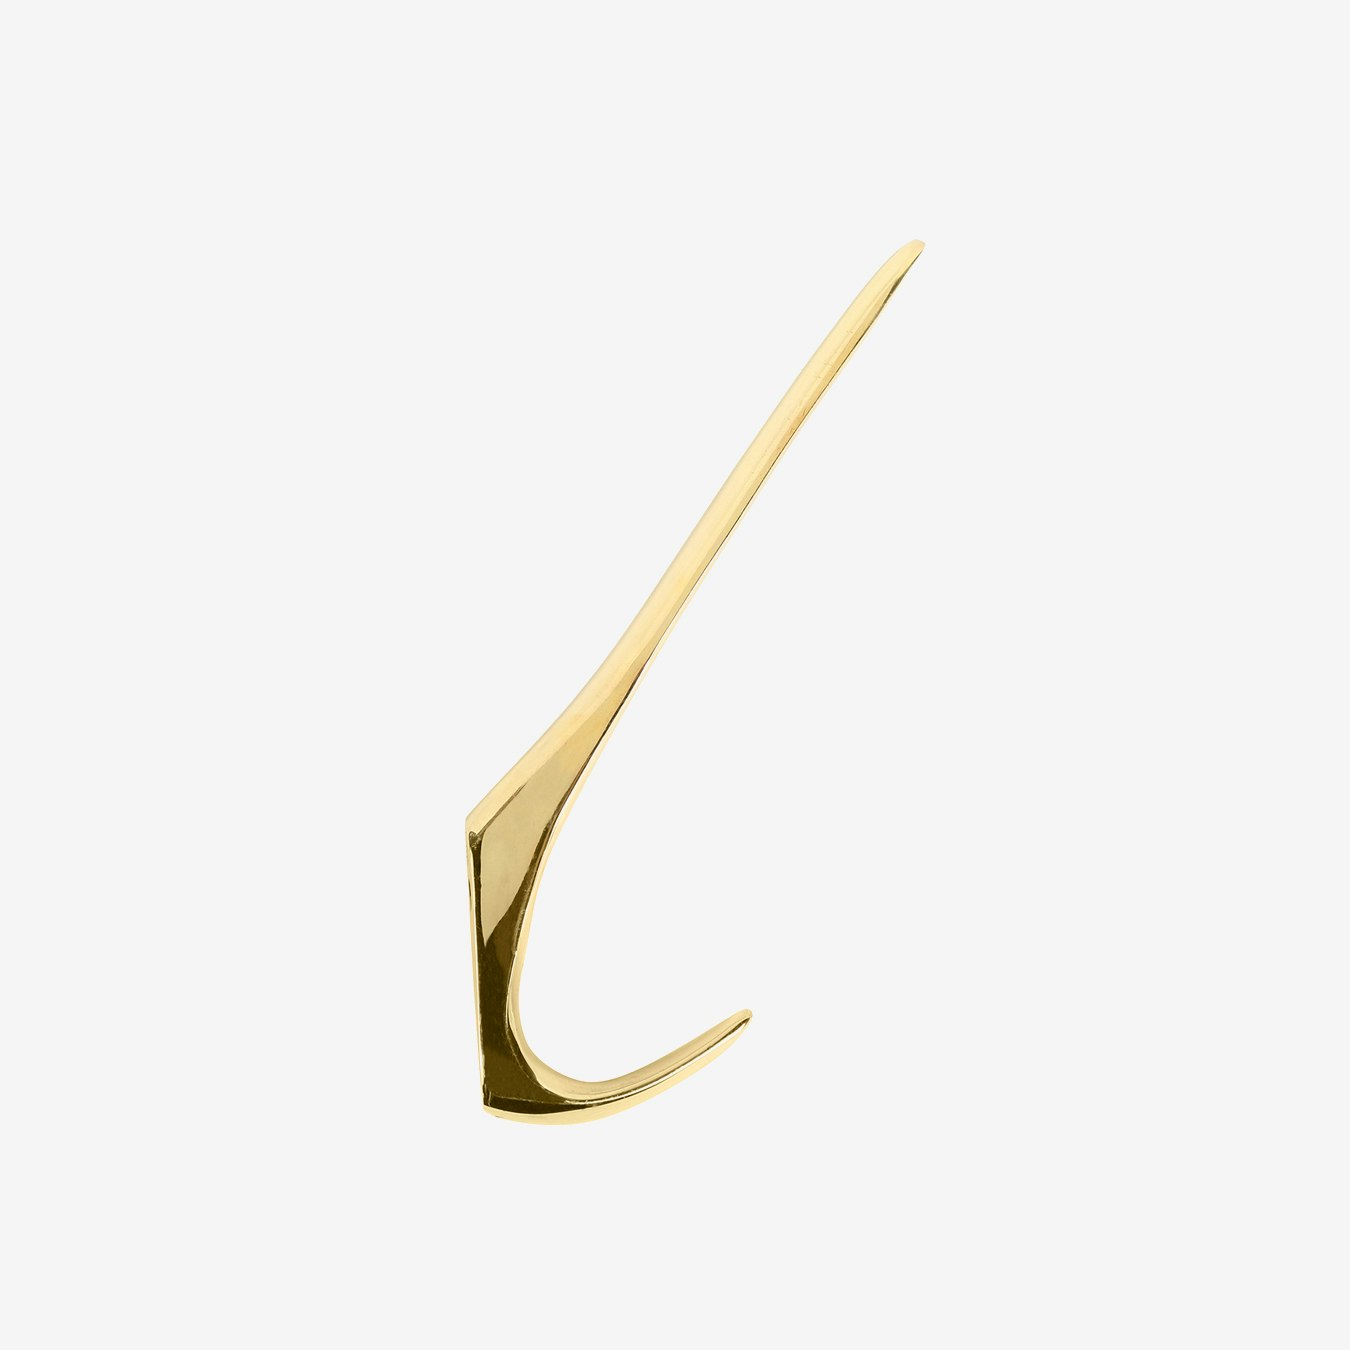 Solid Brass Stile Liberty Hook by Sir/Madam - Fy